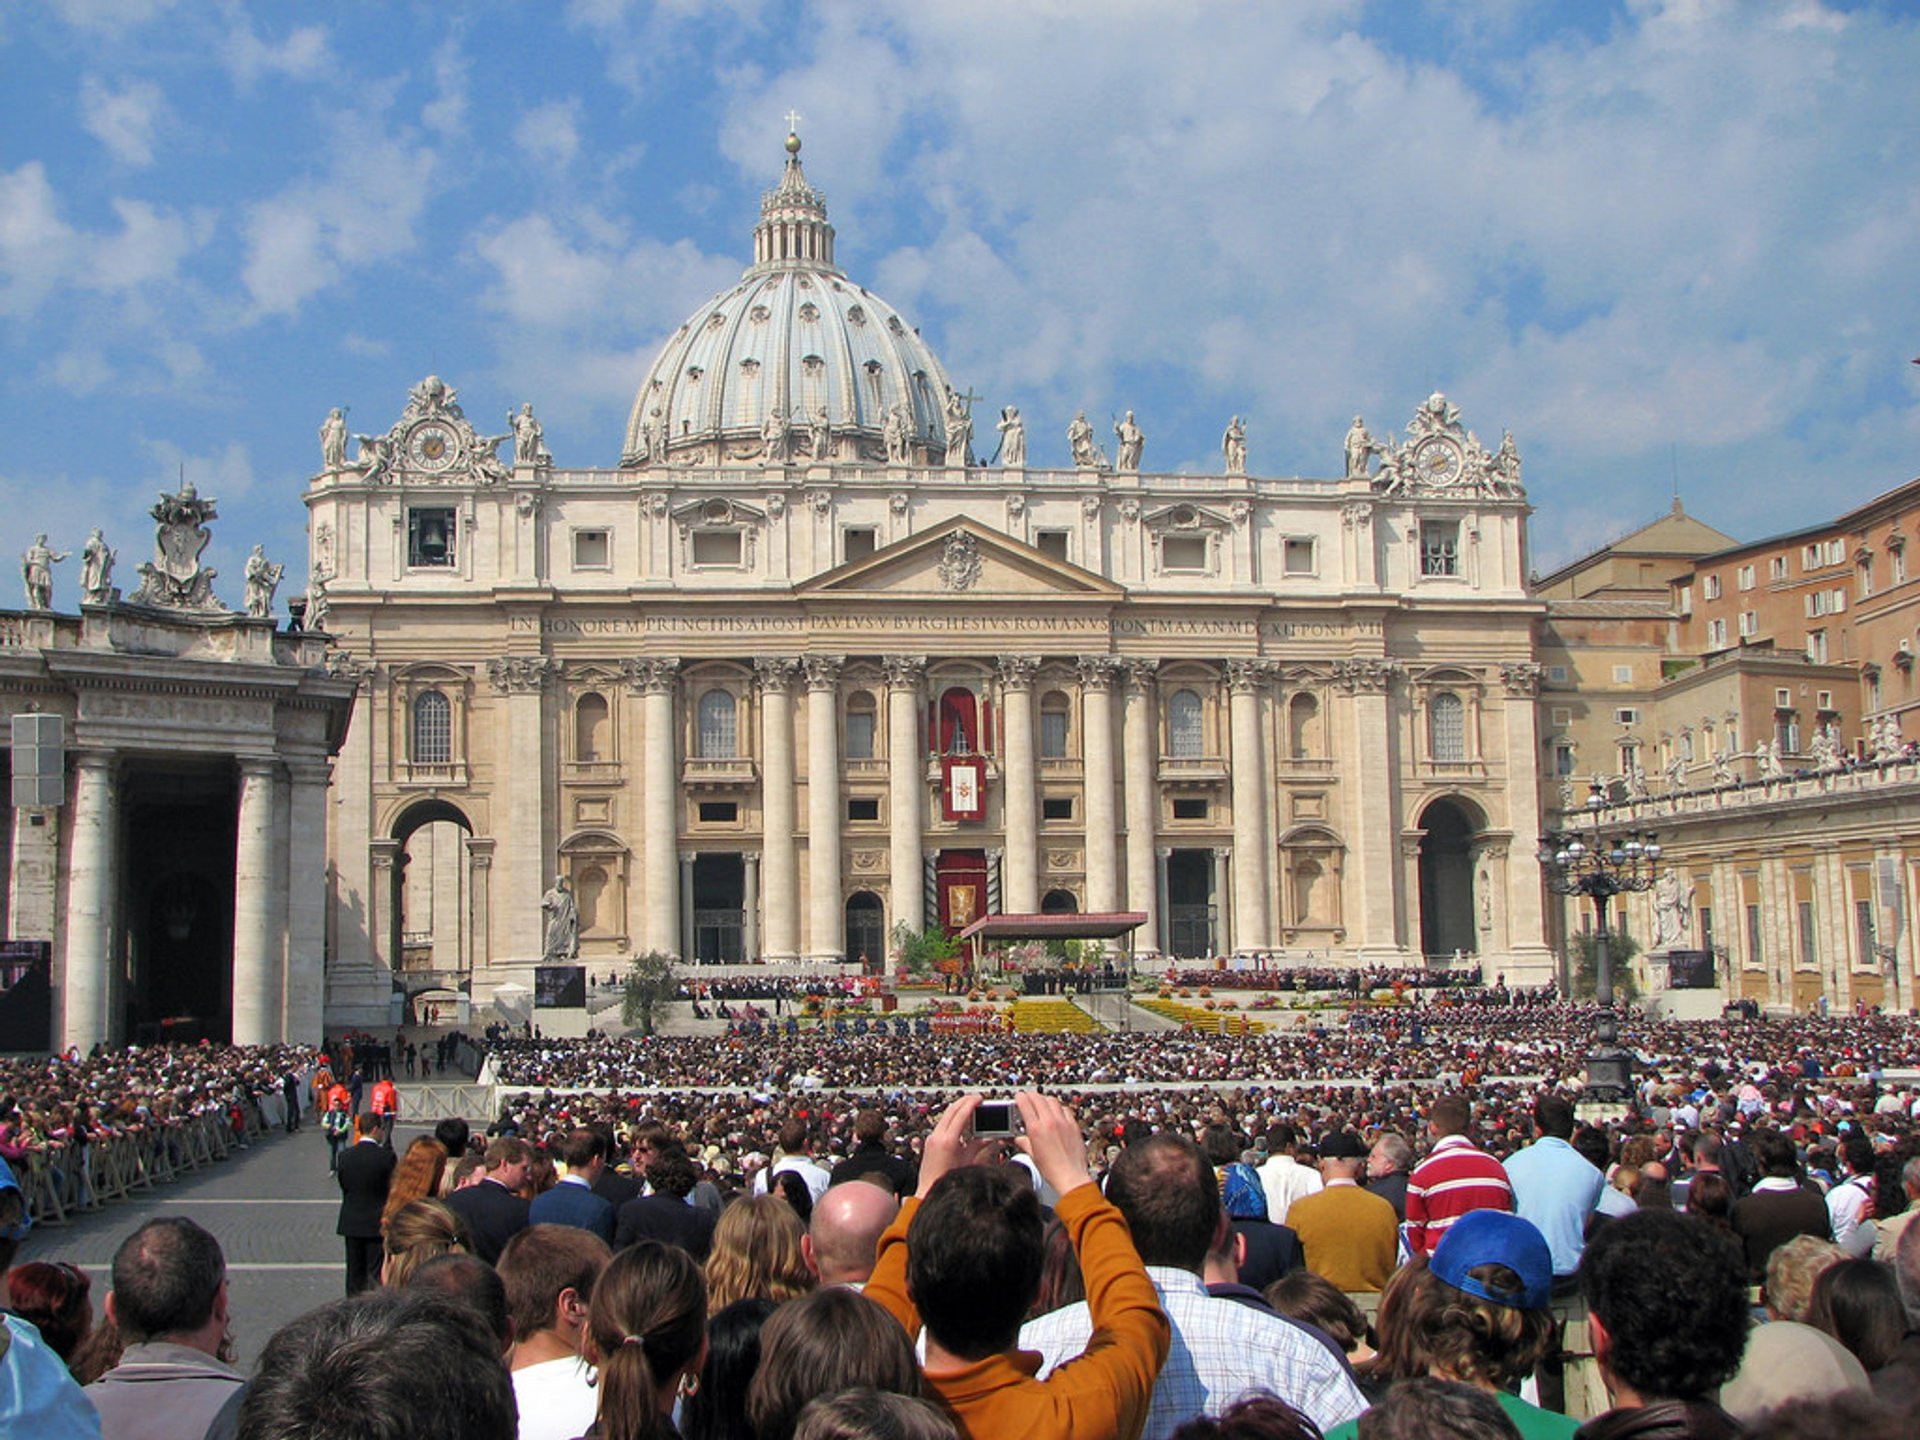 Easter Activities Near Me 2020
 Settimana Santa Holy Week & Easter 2020 in Rome Dates